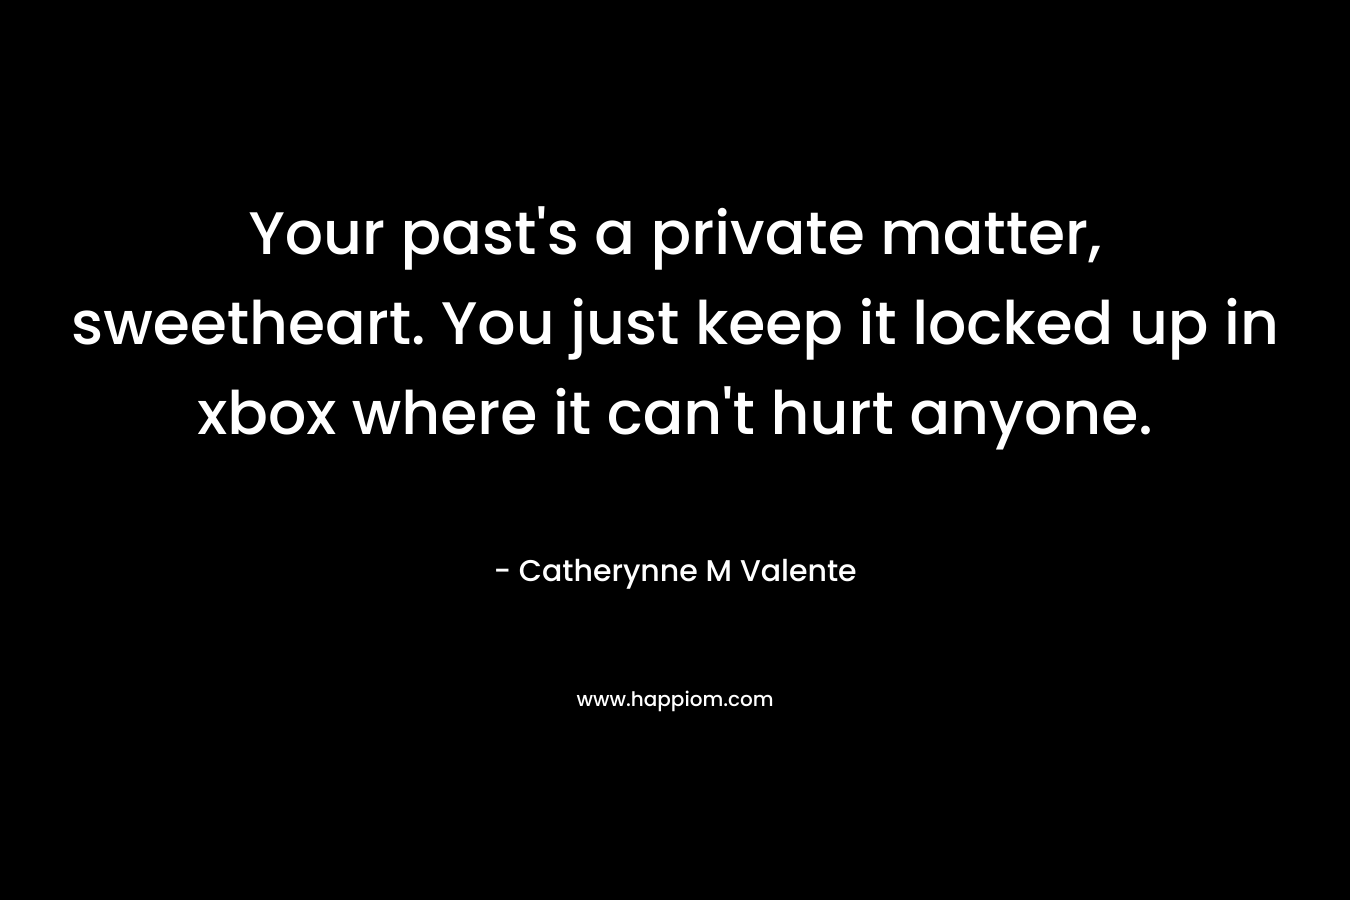 Your past’s a private matter, sweetheart. You just keep it locked up in xbox where it can’t hurt anyone. – Catherynne M Valente